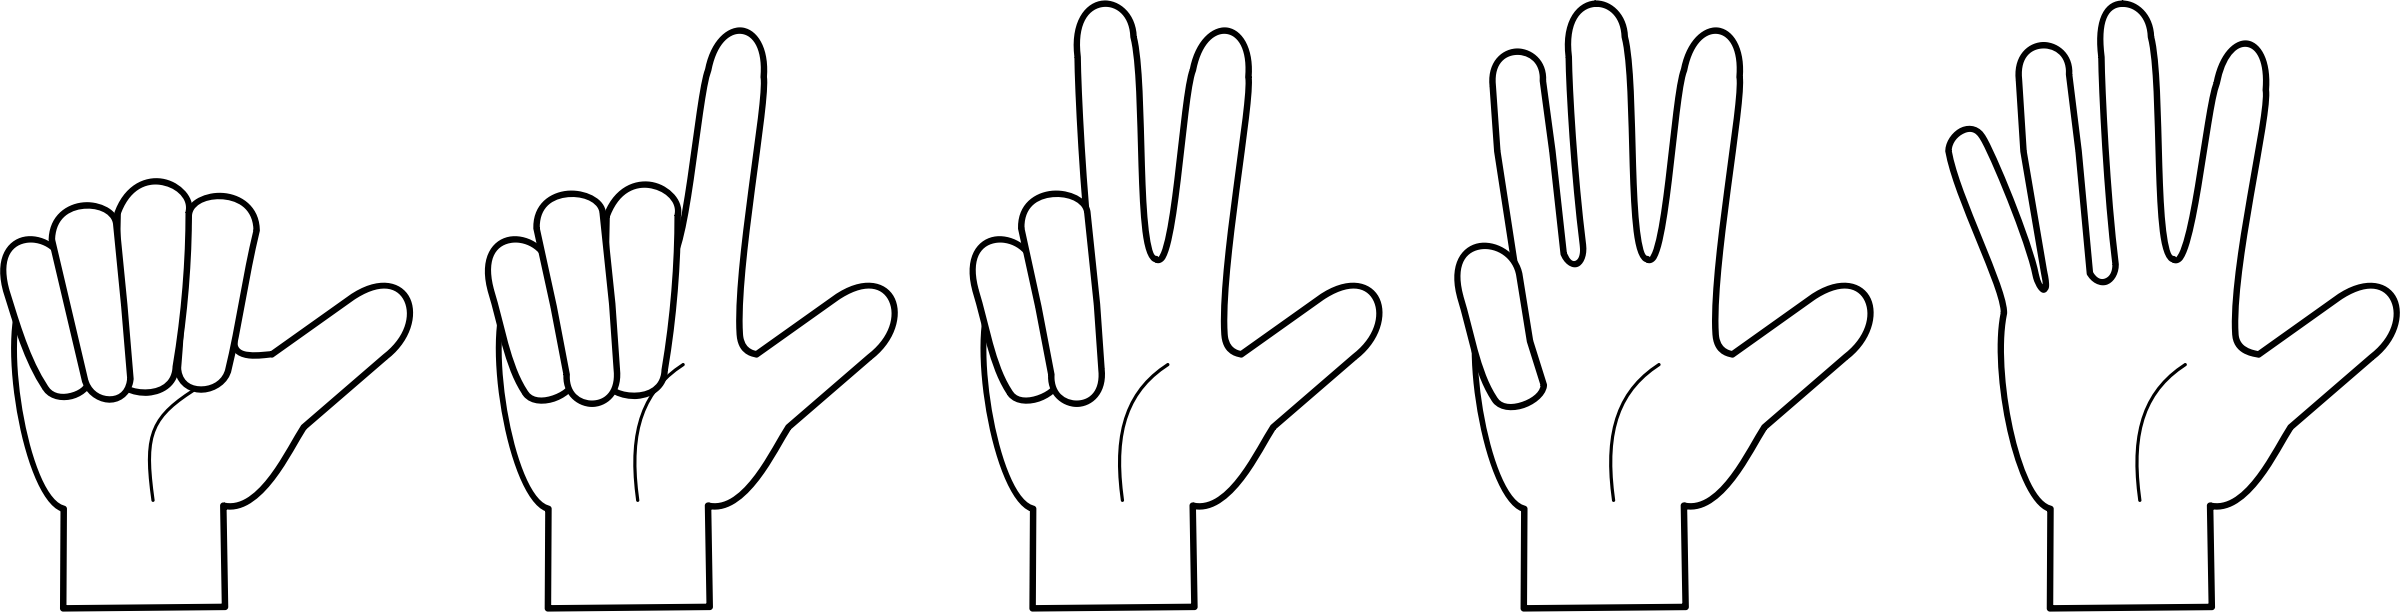 This Free Icons Png Design Of Count On Fingers Hdpng.com  - Counting, Transparent background PNG HD thumbnail